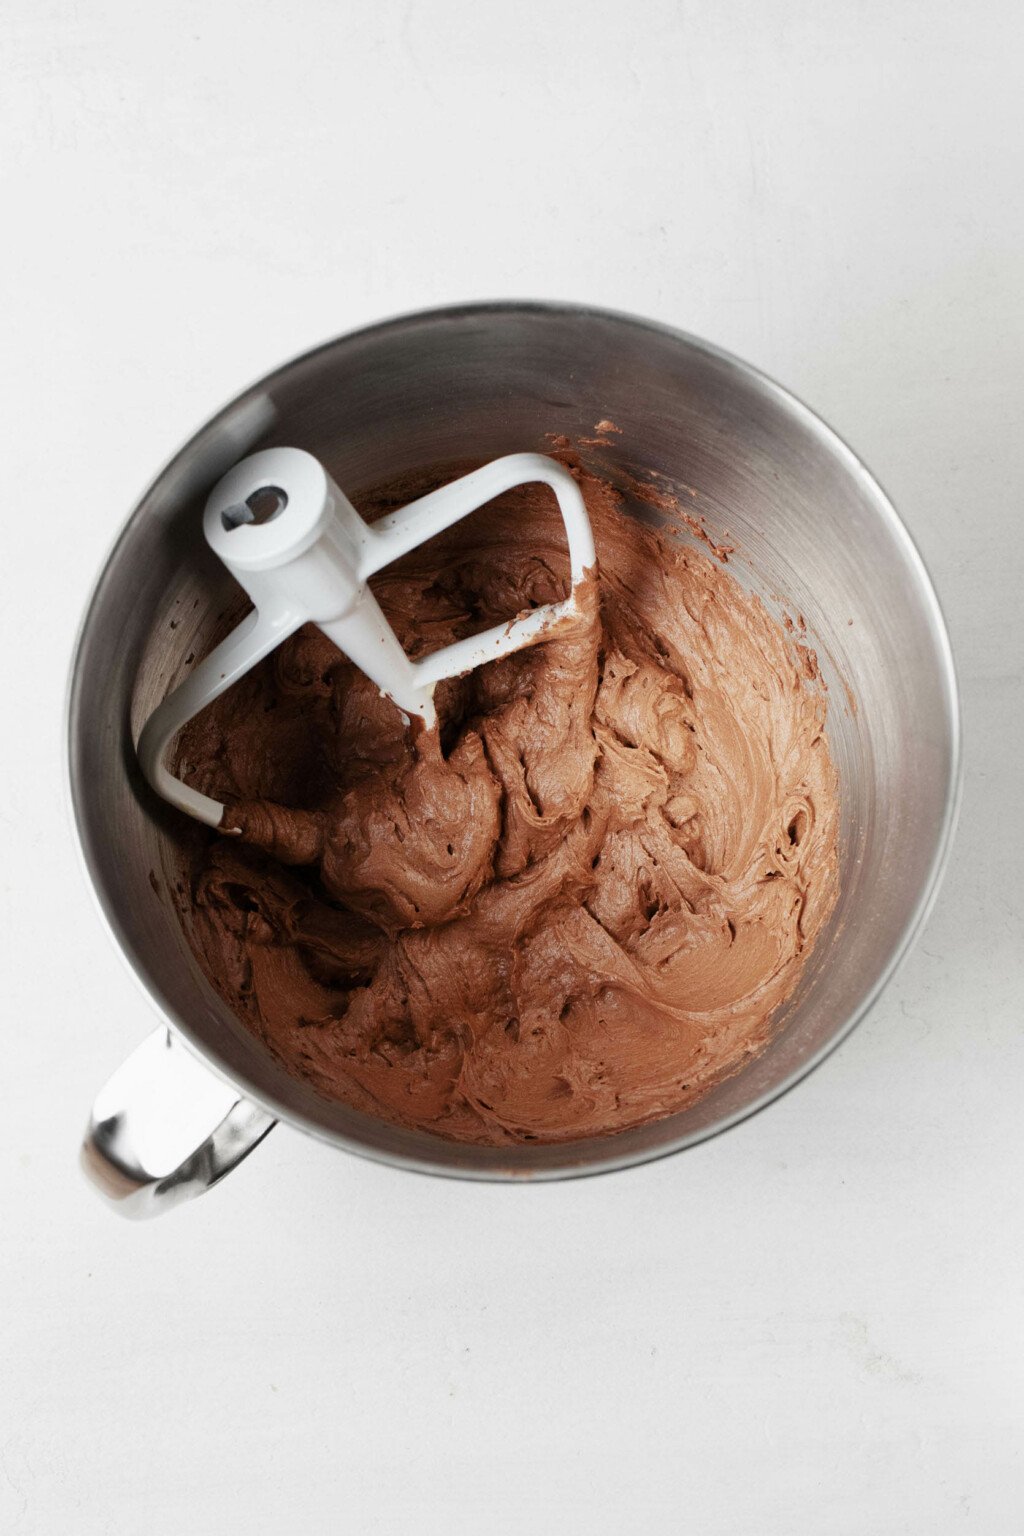 The silver bowl of a stand mixer has just been used to prepare vegan chocolate frosting. The white paddle attachment rests in the bowl.